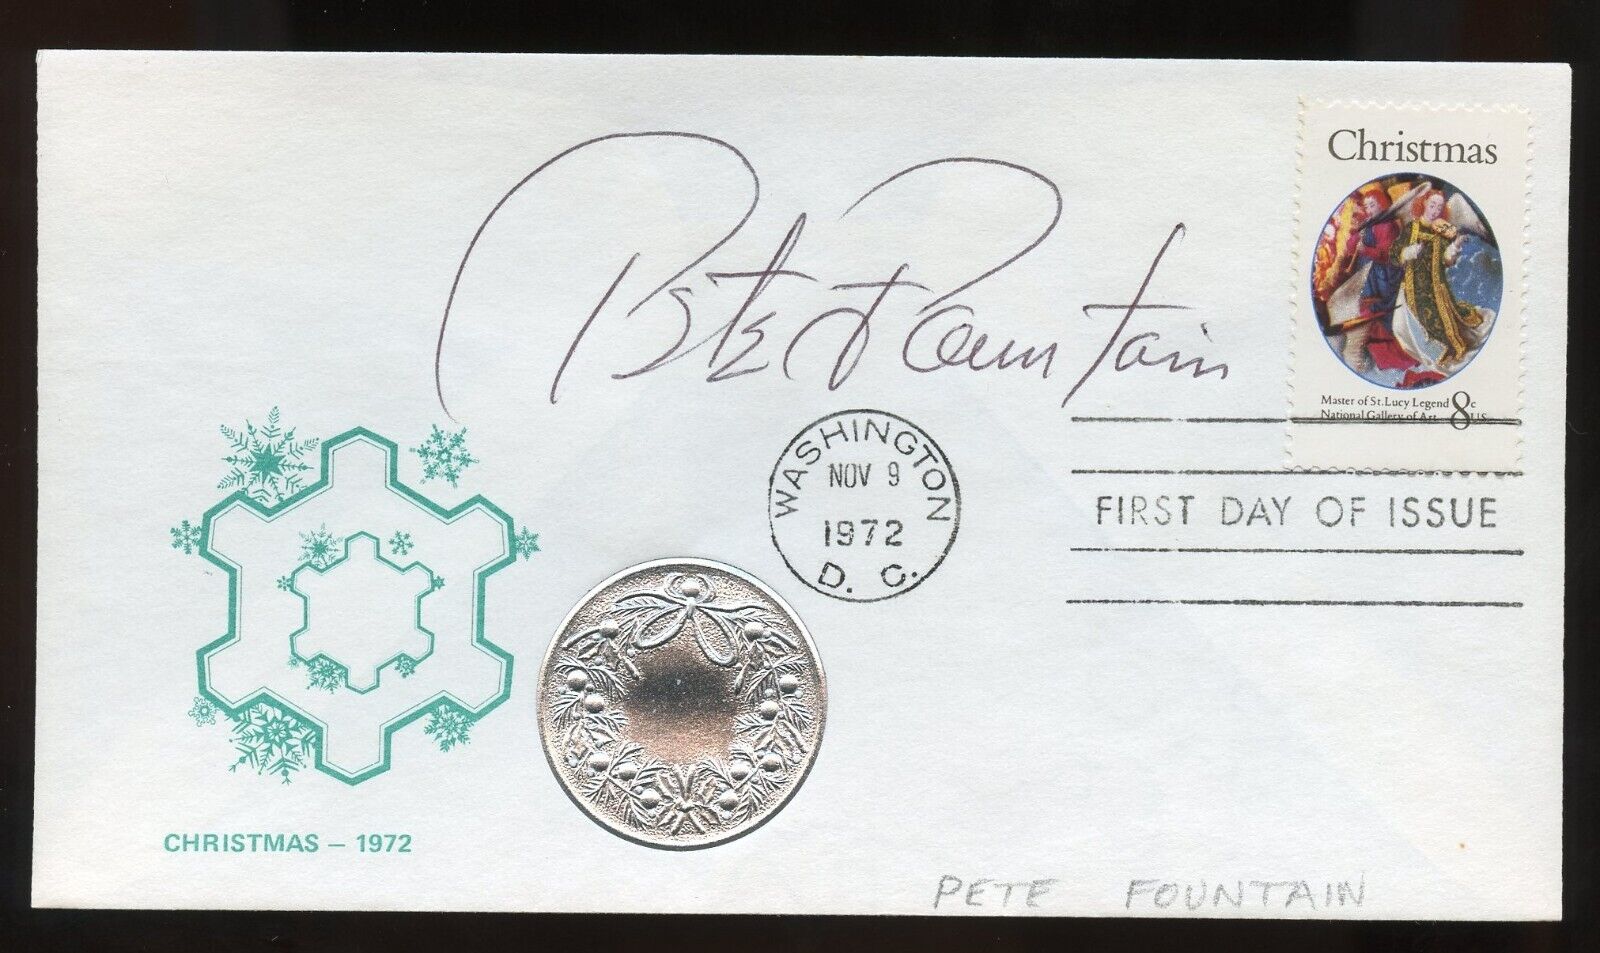 Pete Fountaine d2016 signed autograph American Jazz Clarinetist First Day Cover